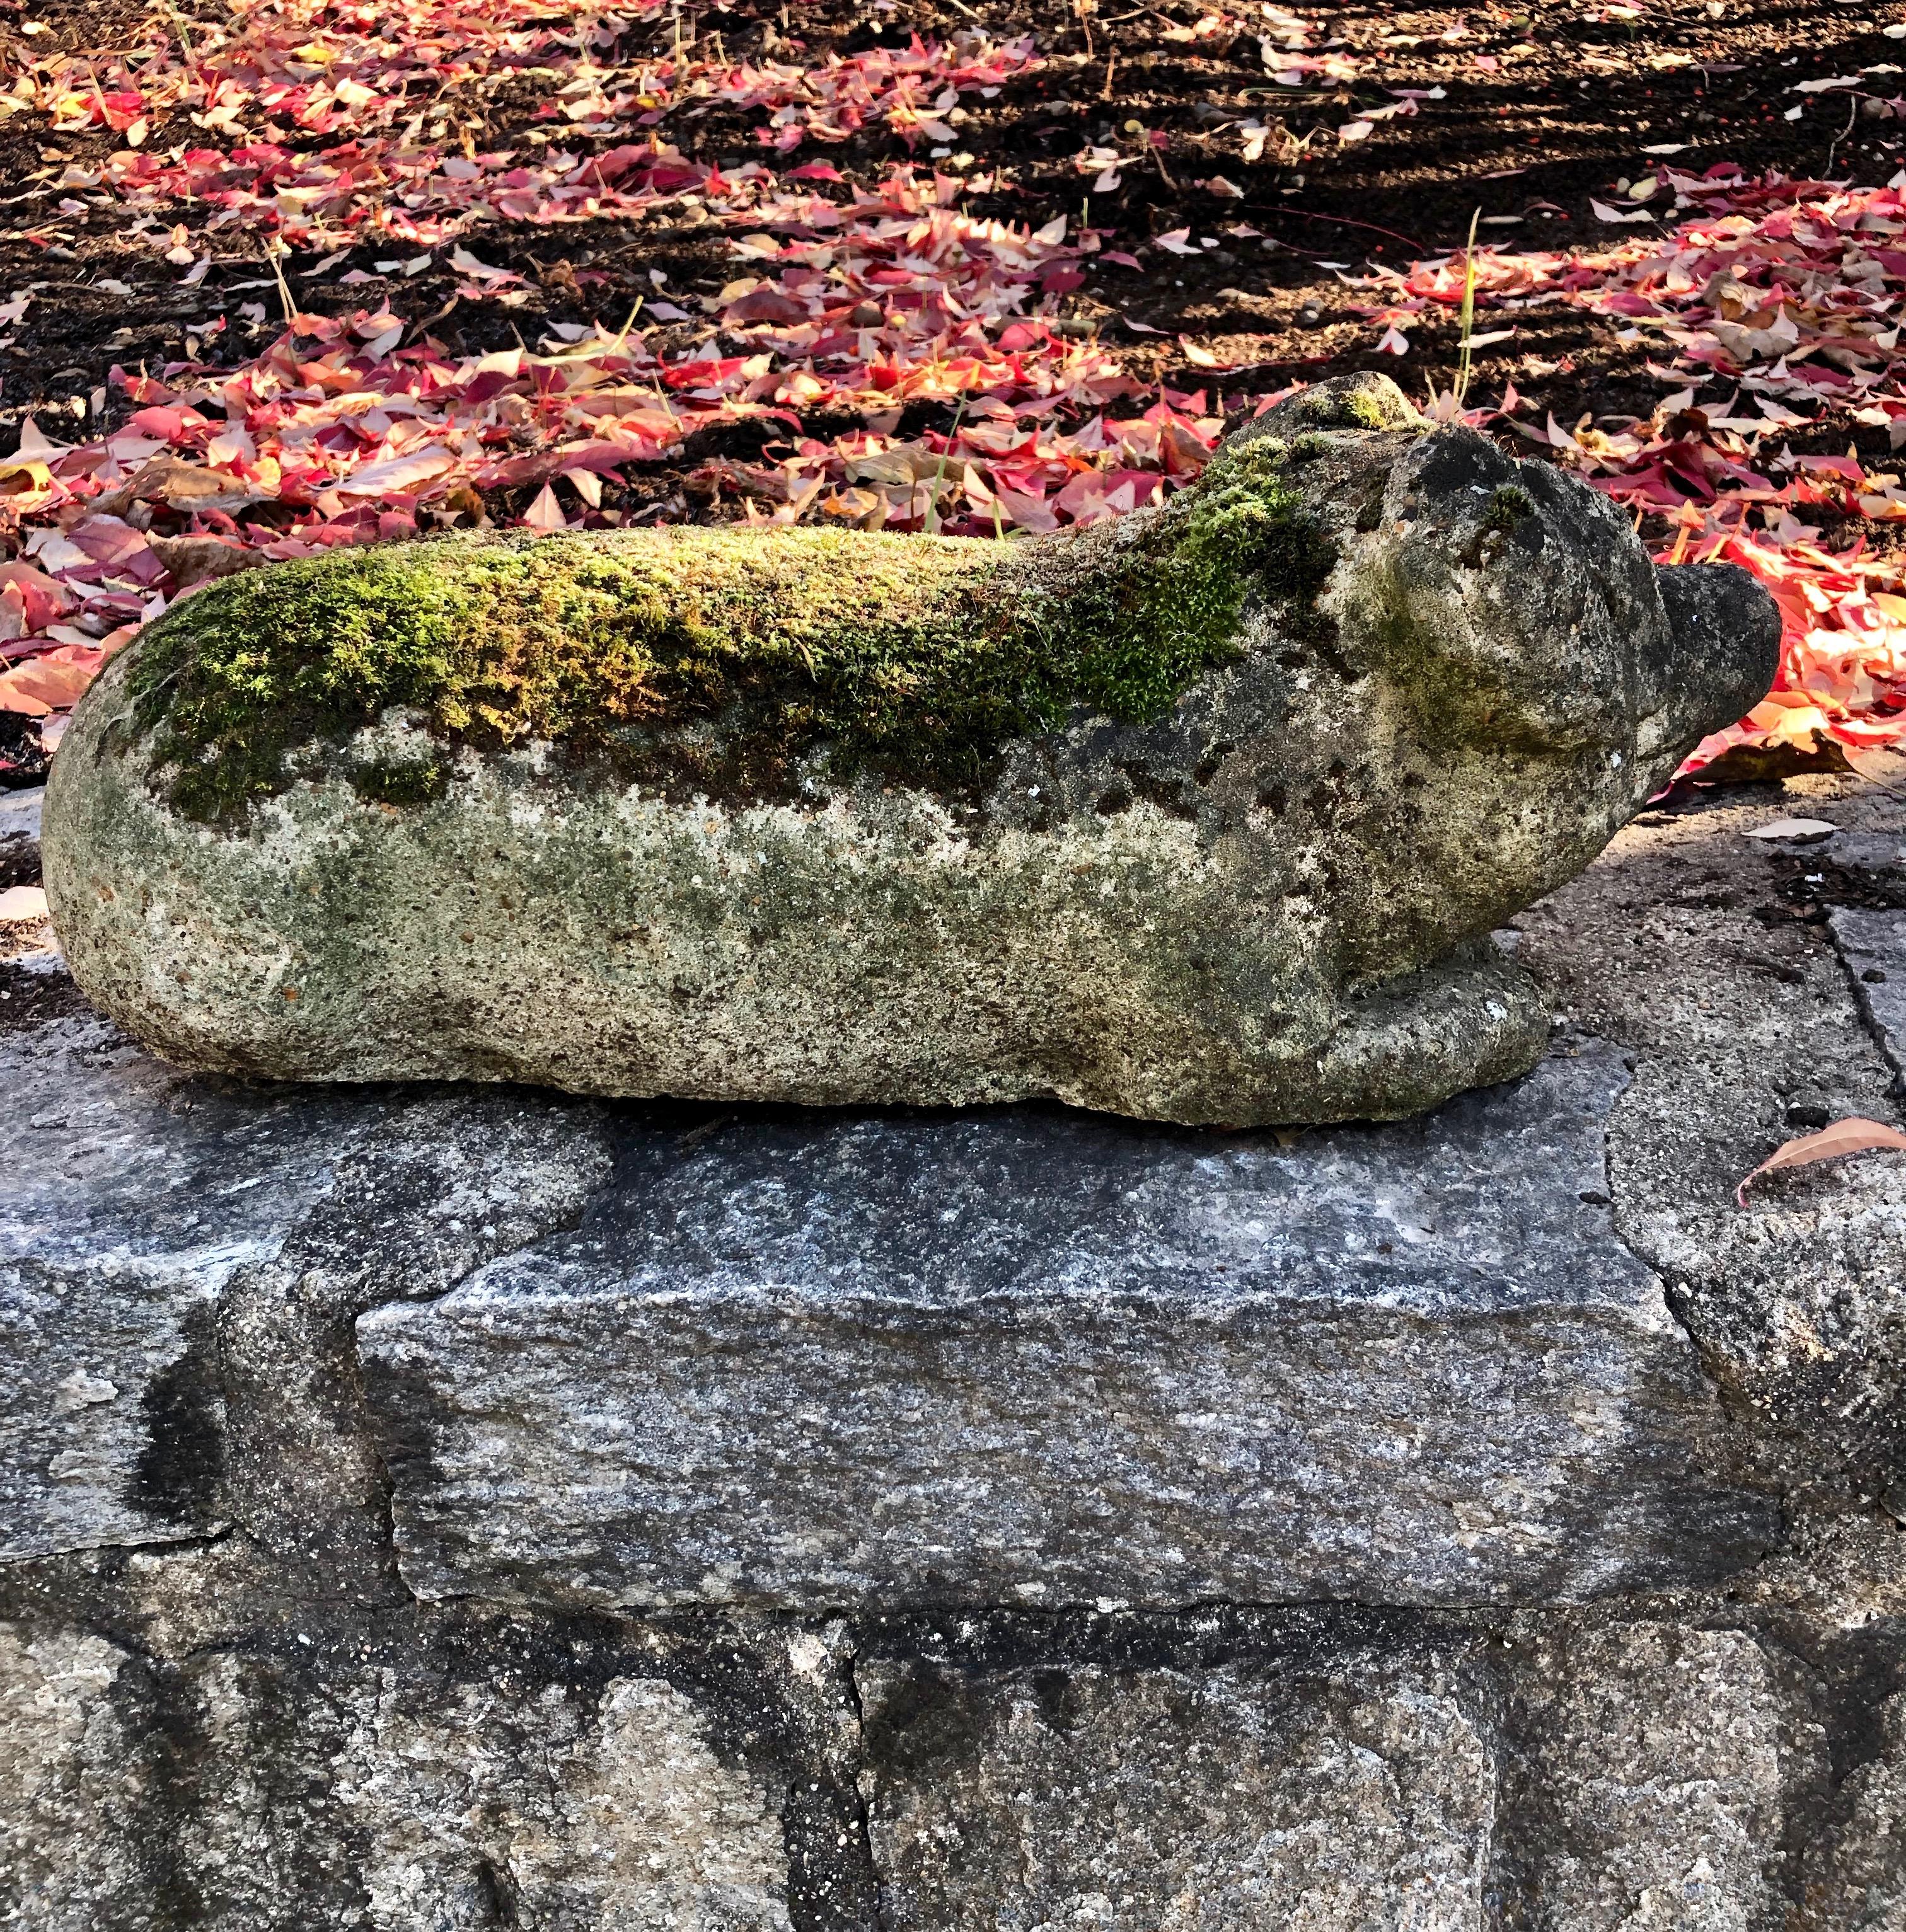 We love animal statues, particularly ones with character, great surface and, preferably, moss and this little piggy does not disappoint. In an unusual recumbent position, he has a heavily weathered surface and tons of moss. In wonderful vintage